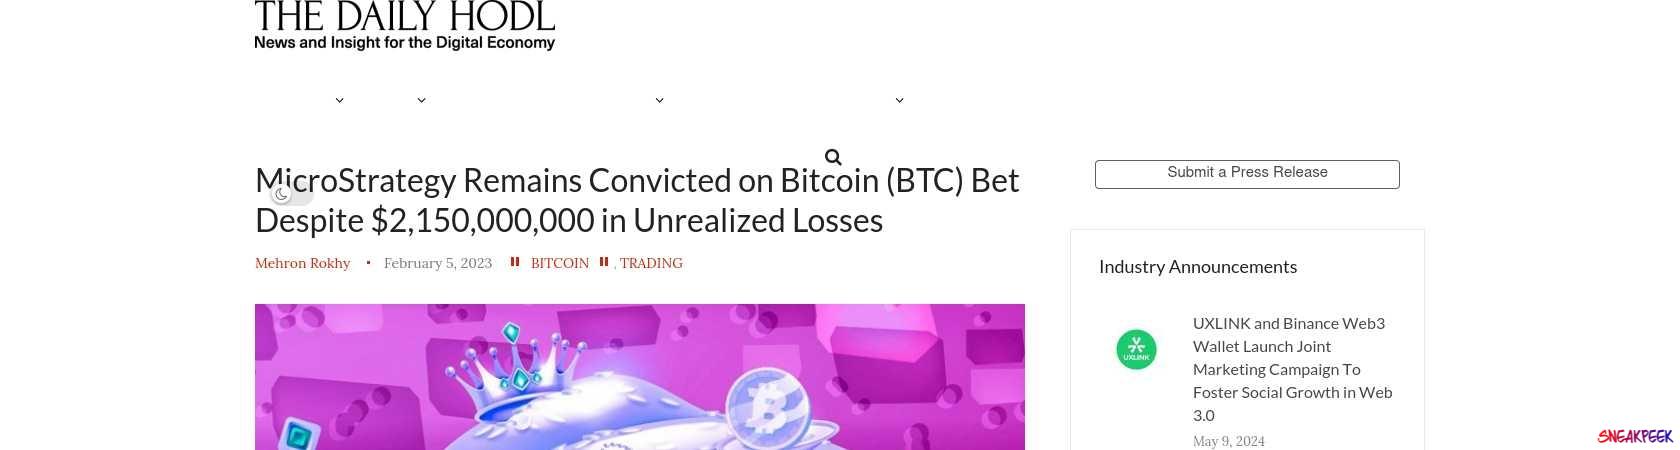 Read the full Article:  ⭲ MicroStrategy Remains Convicted on Bitcoin (BTC) Bet Despite $2,150,000,000 in Unrealized Losses